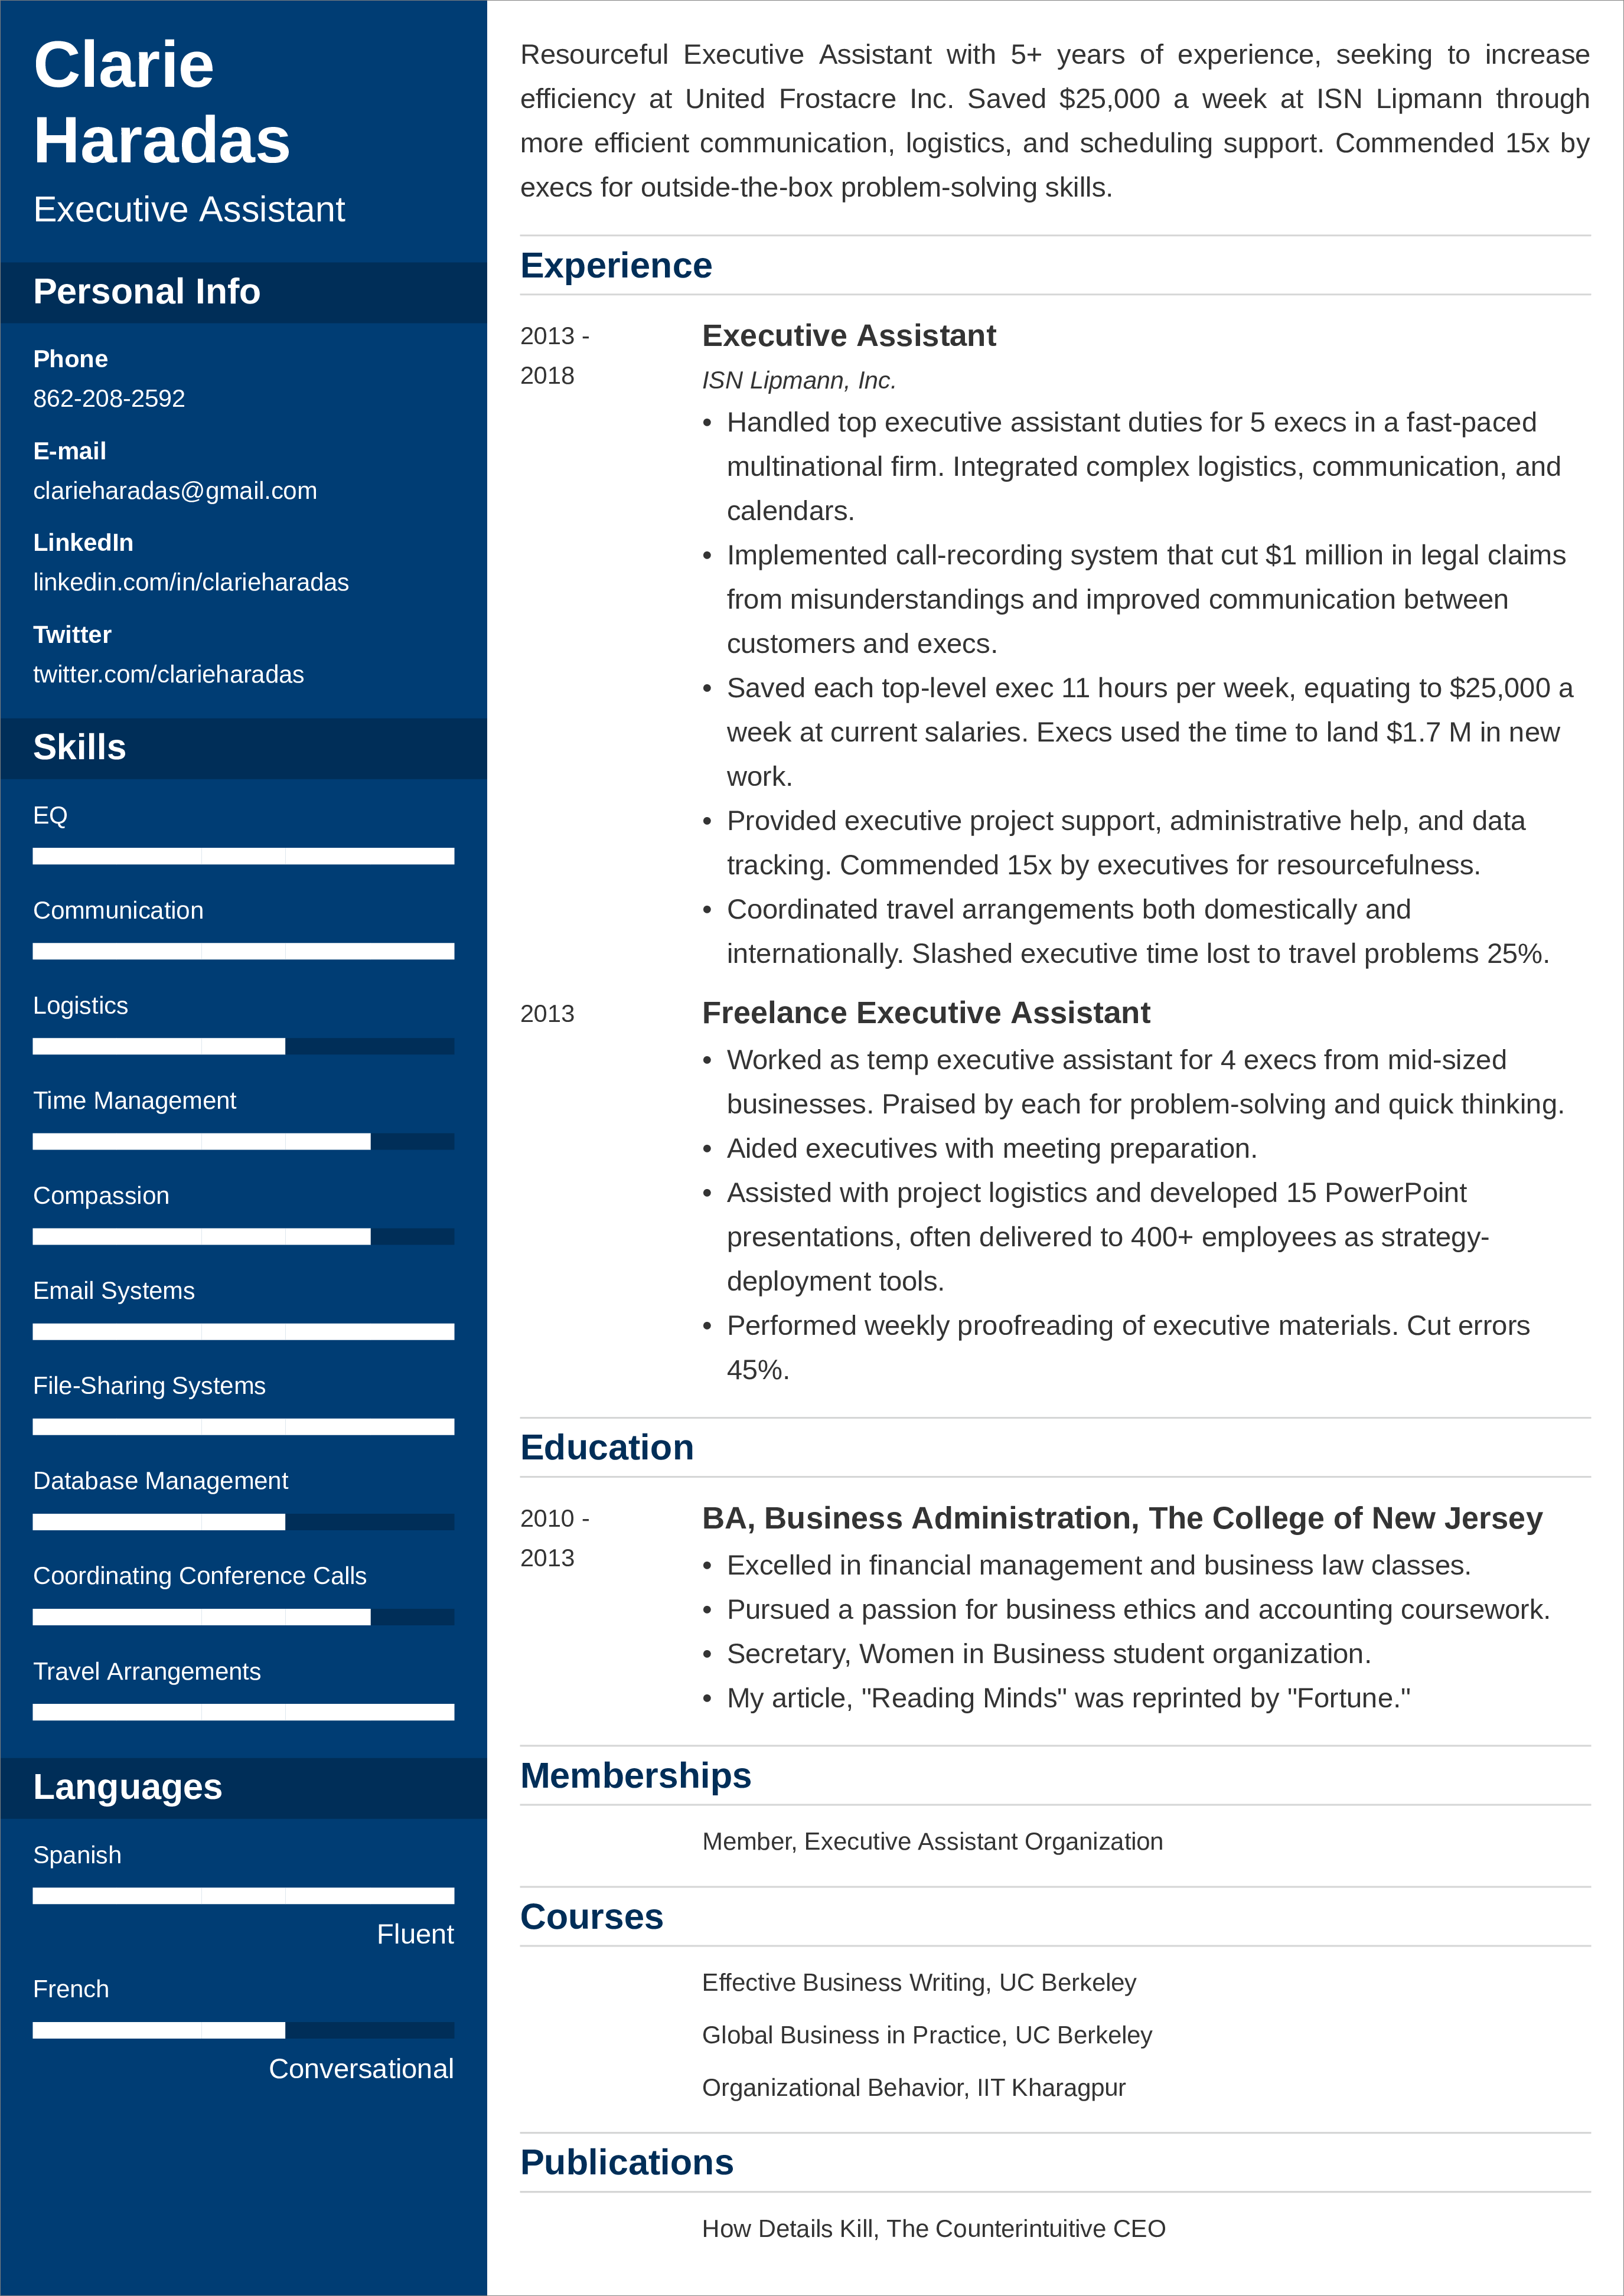 Hobbies and Interests on Resume: Full List, Guide &  20+ Examples